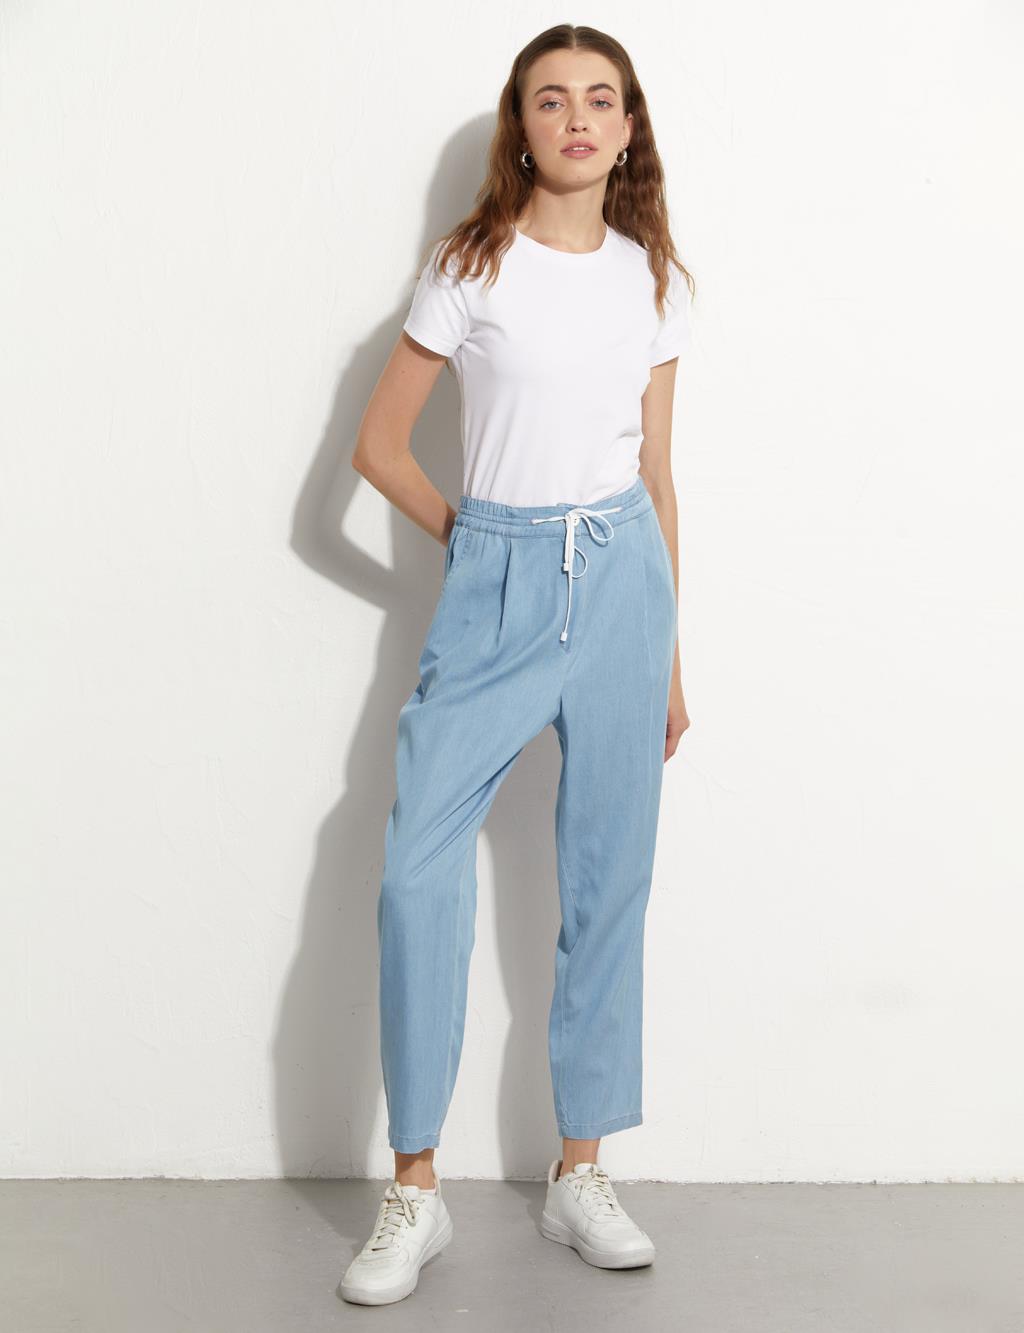 NATIVA, RIGID JEANS. ANNY REAL 01 ICE BLUE, High-Rise Palazzo Jeans 10